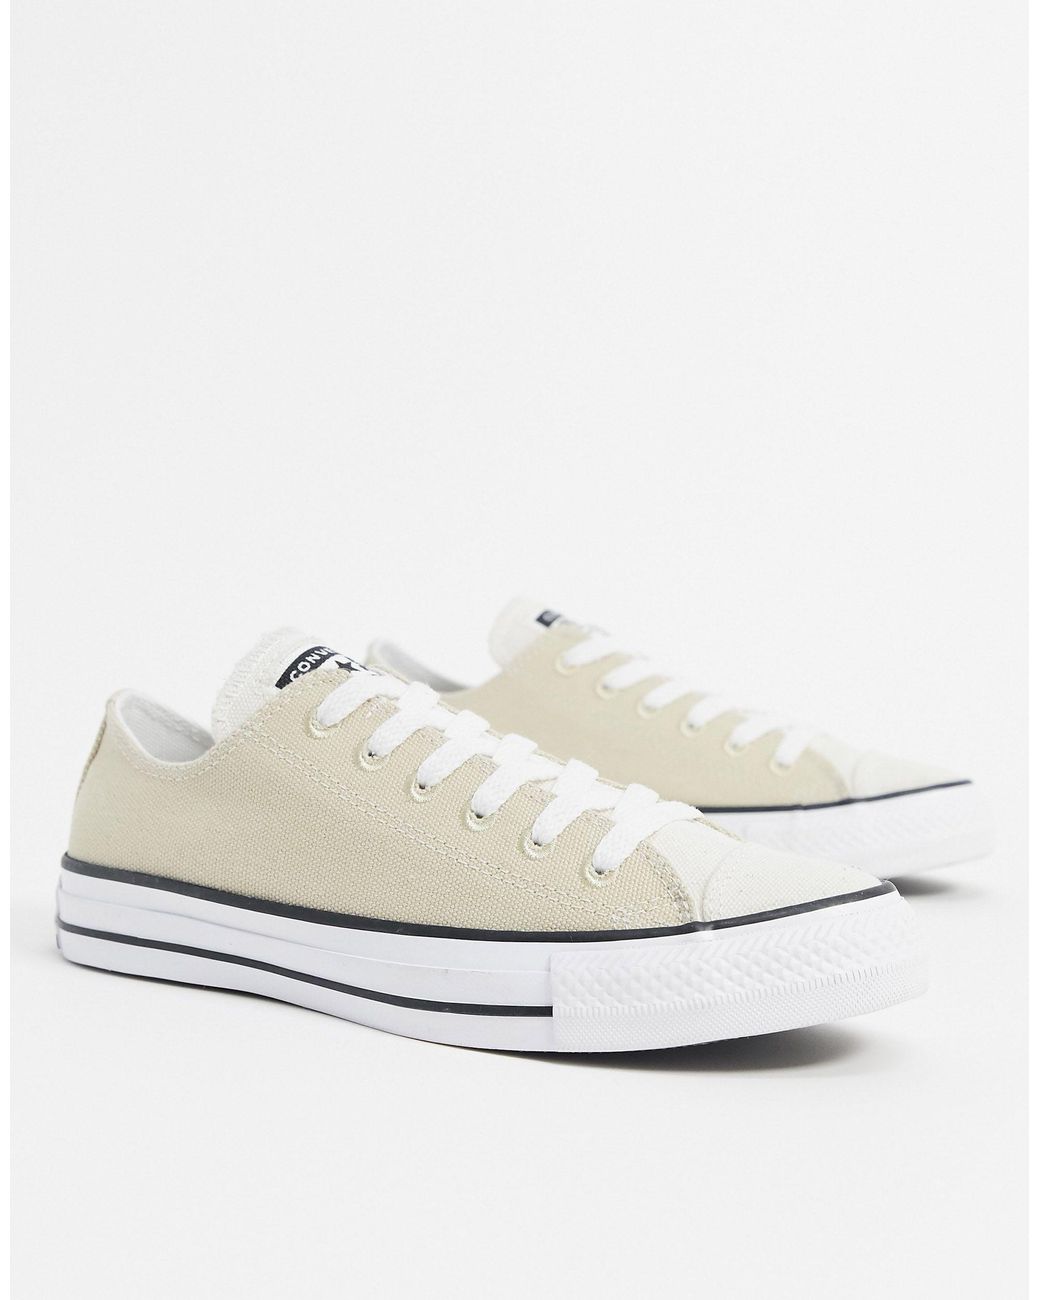 Converse Rubber Chuck Taylor All Star Ox Renew Sneakers in Beige (Natural)  - Lyst